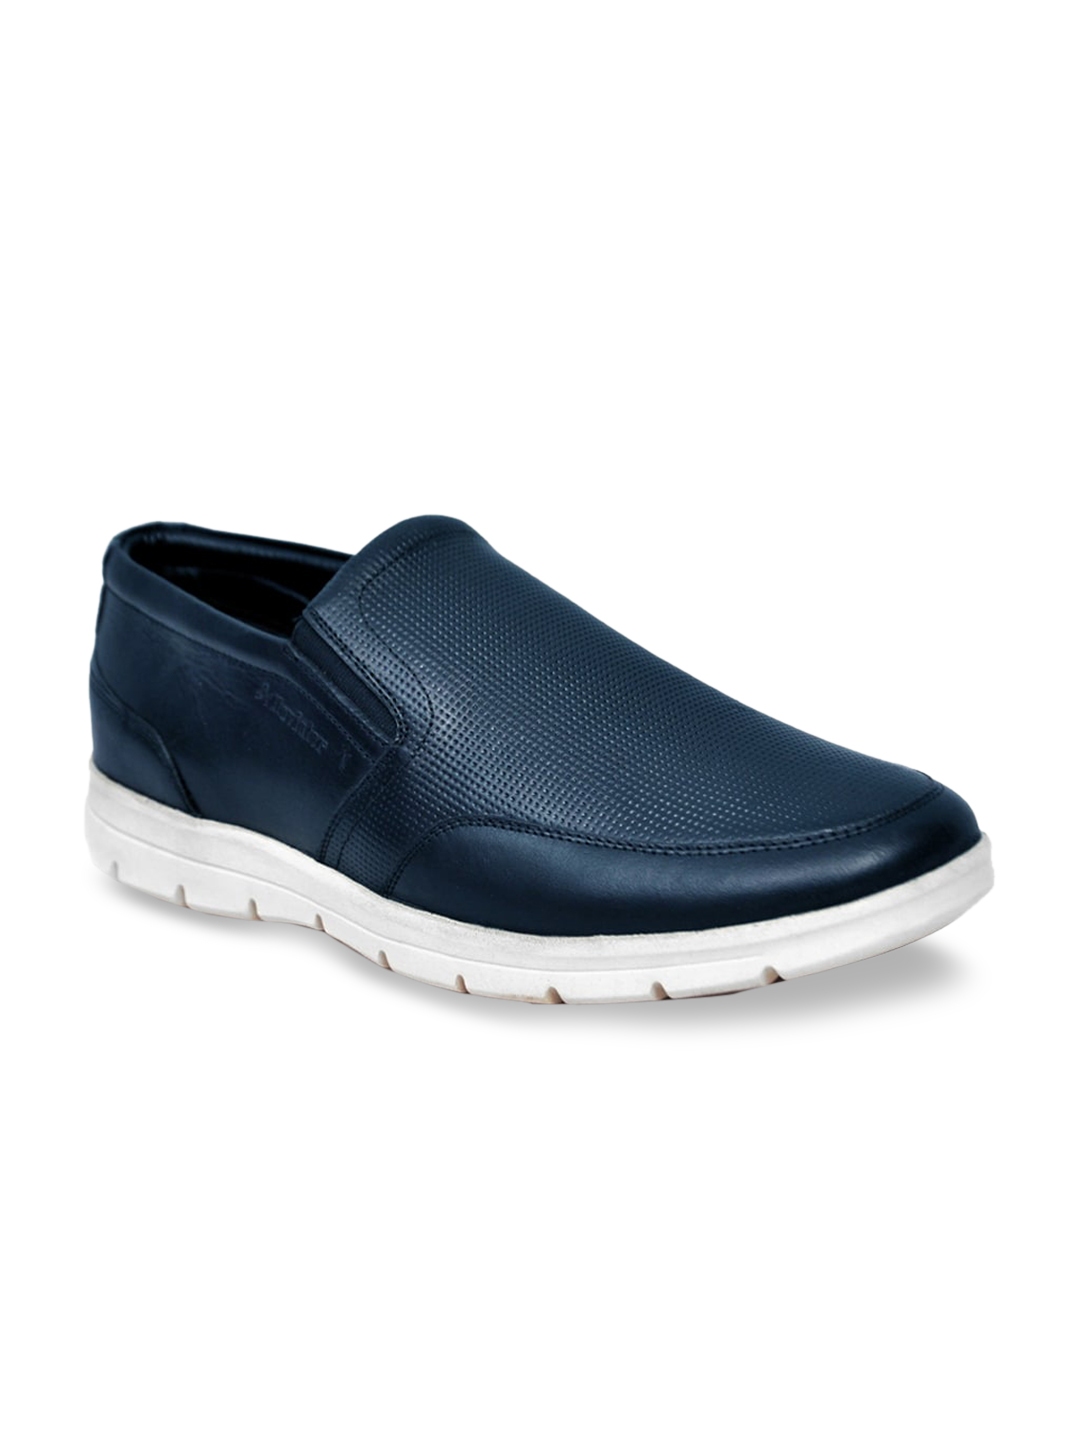 Buy Alleviater Men Navy Blue Perforated Leather Loafers - Casual Shoes ...